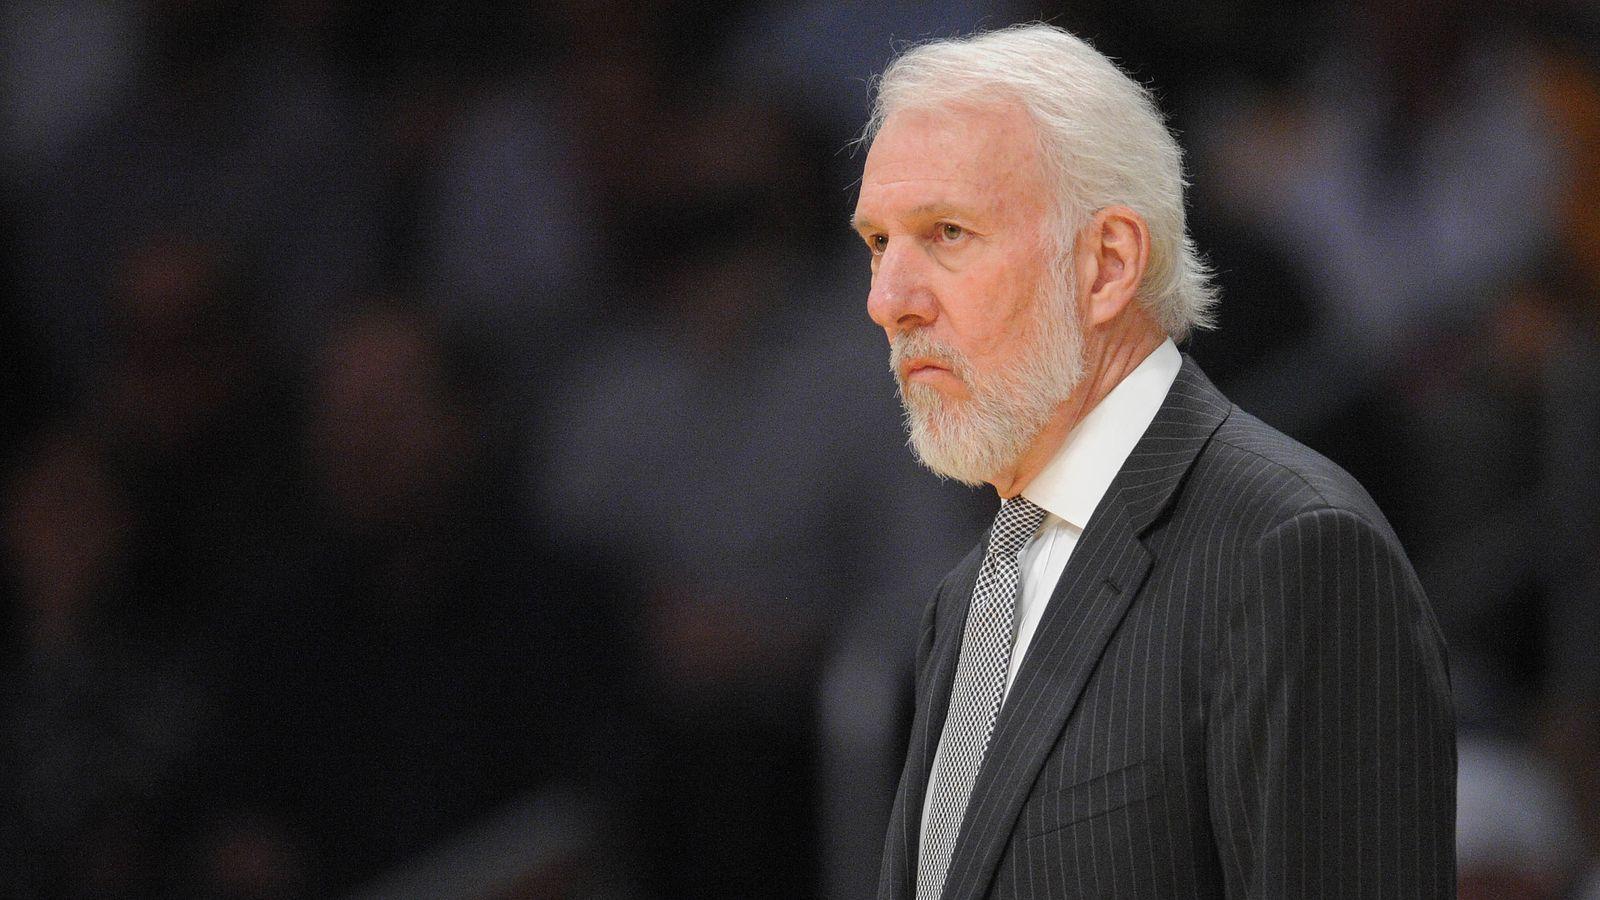 Gregg Popovich on Donald Trump: 'You can't really believe anything